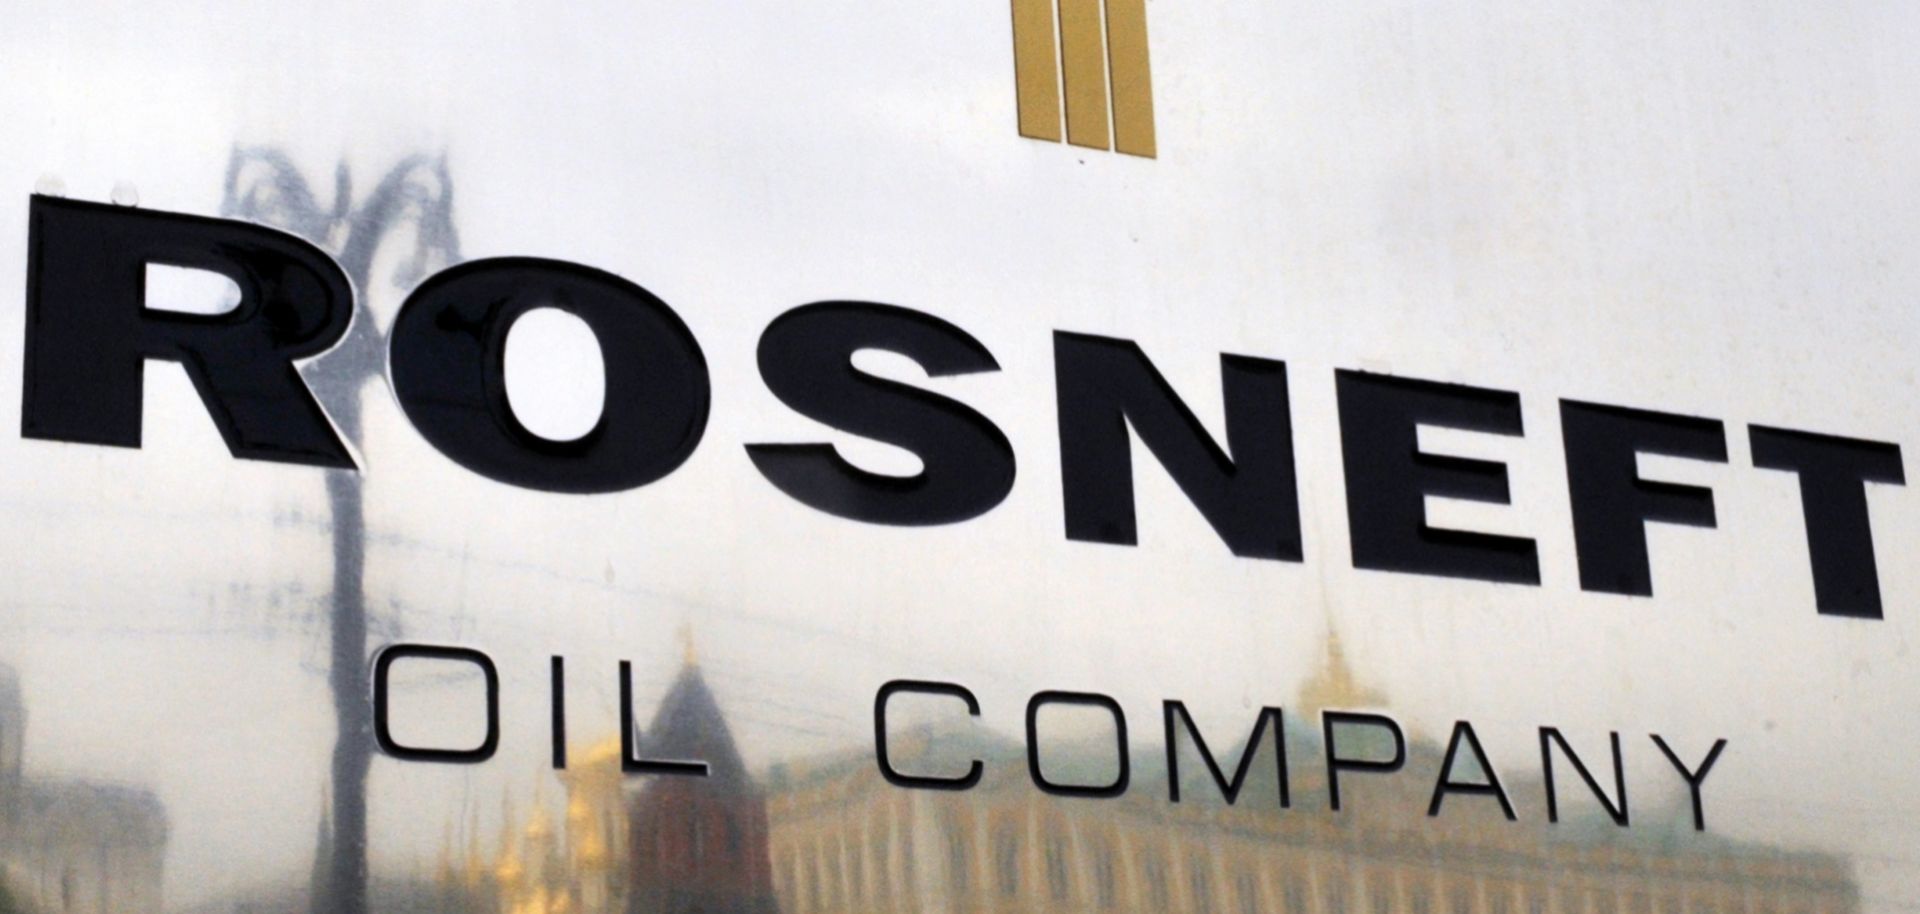 The Kremlin is reflected in the company plate of the state-controlled Russian oil giant Rosneft at the entrance of its Moscow headquarters.